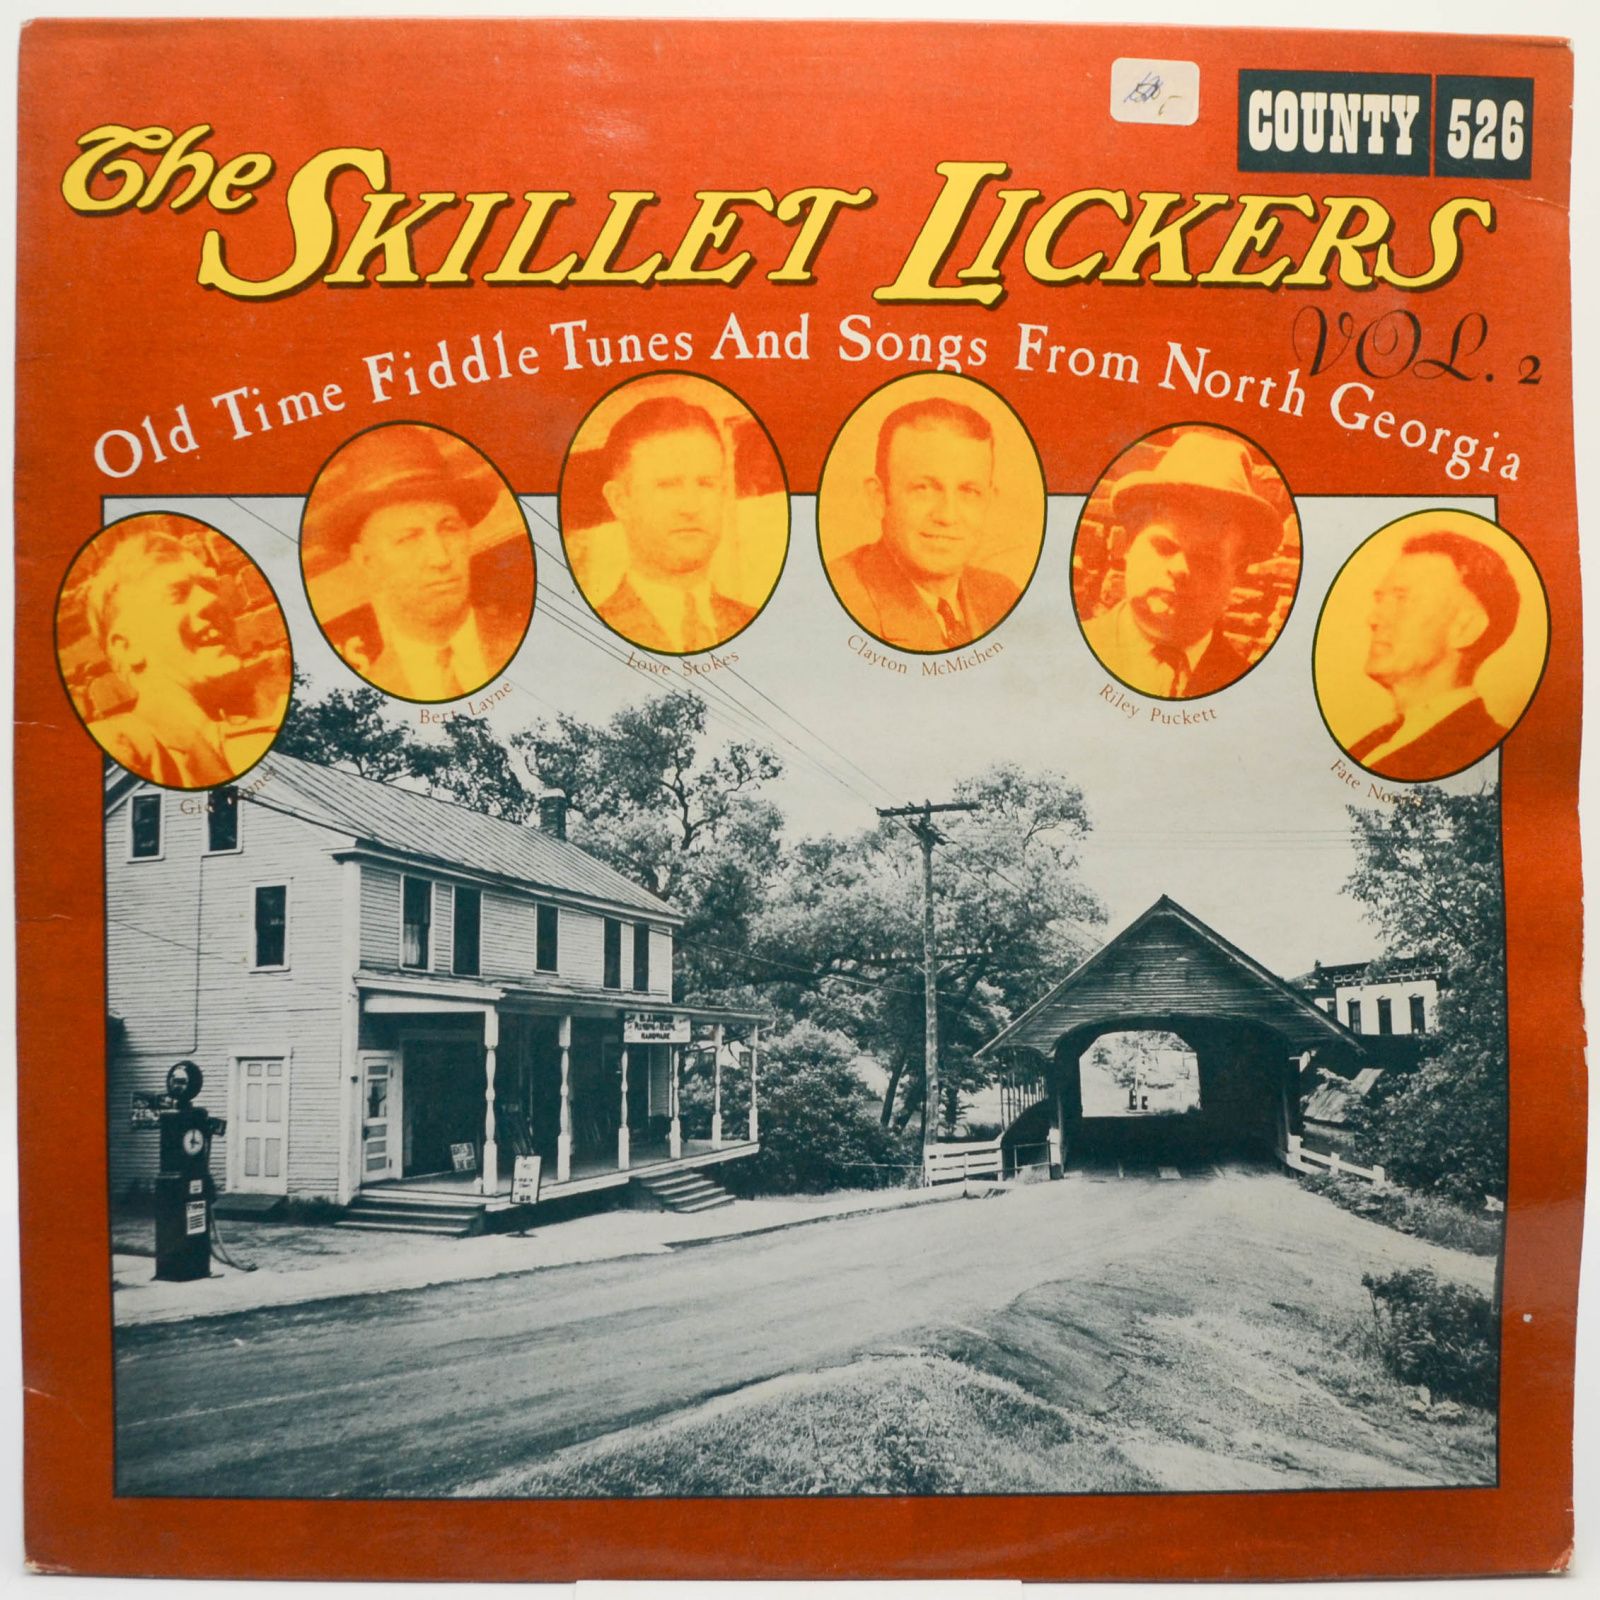 Skillet Lickers — Old Time Fiddle Tunes And Songs From North Georgia Volume 2, 1973